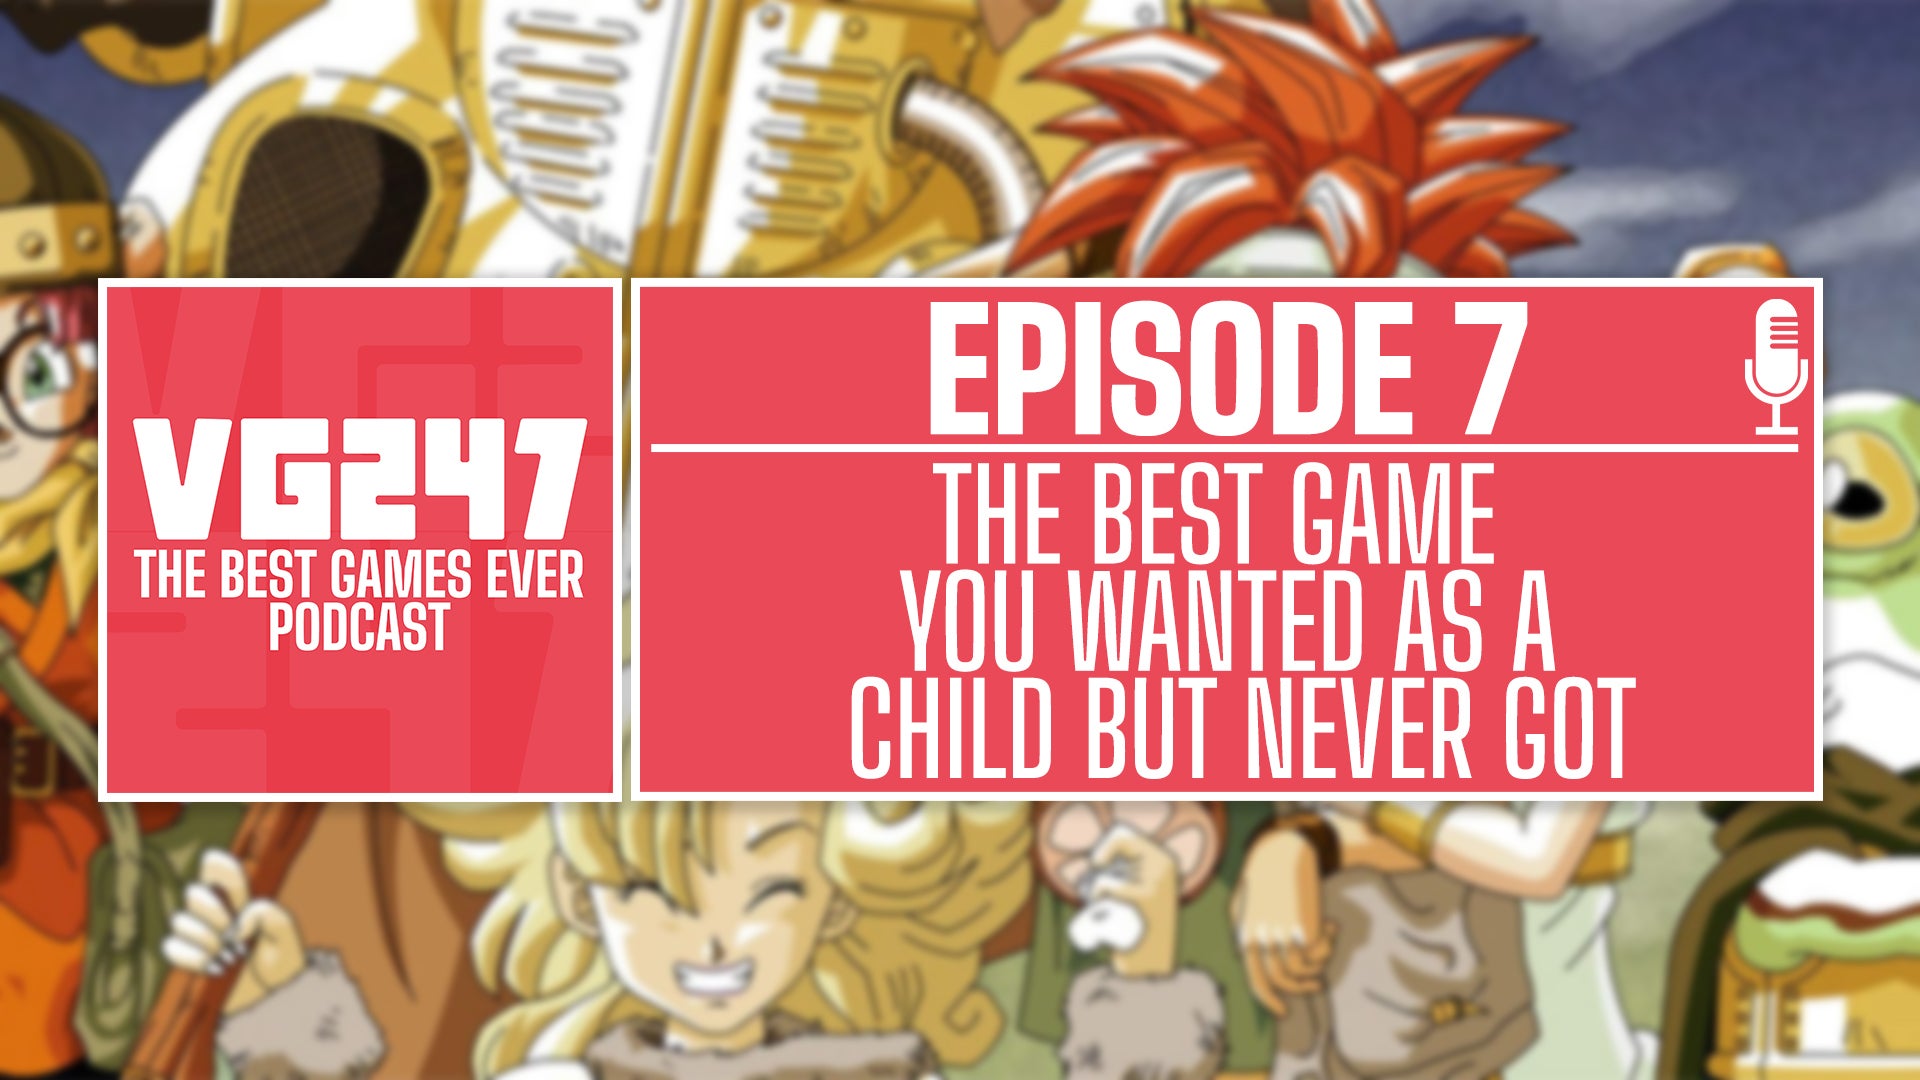 VG247's Best Games Ever Podcast Episode 7 promo image - best game you wanted as a child but never got